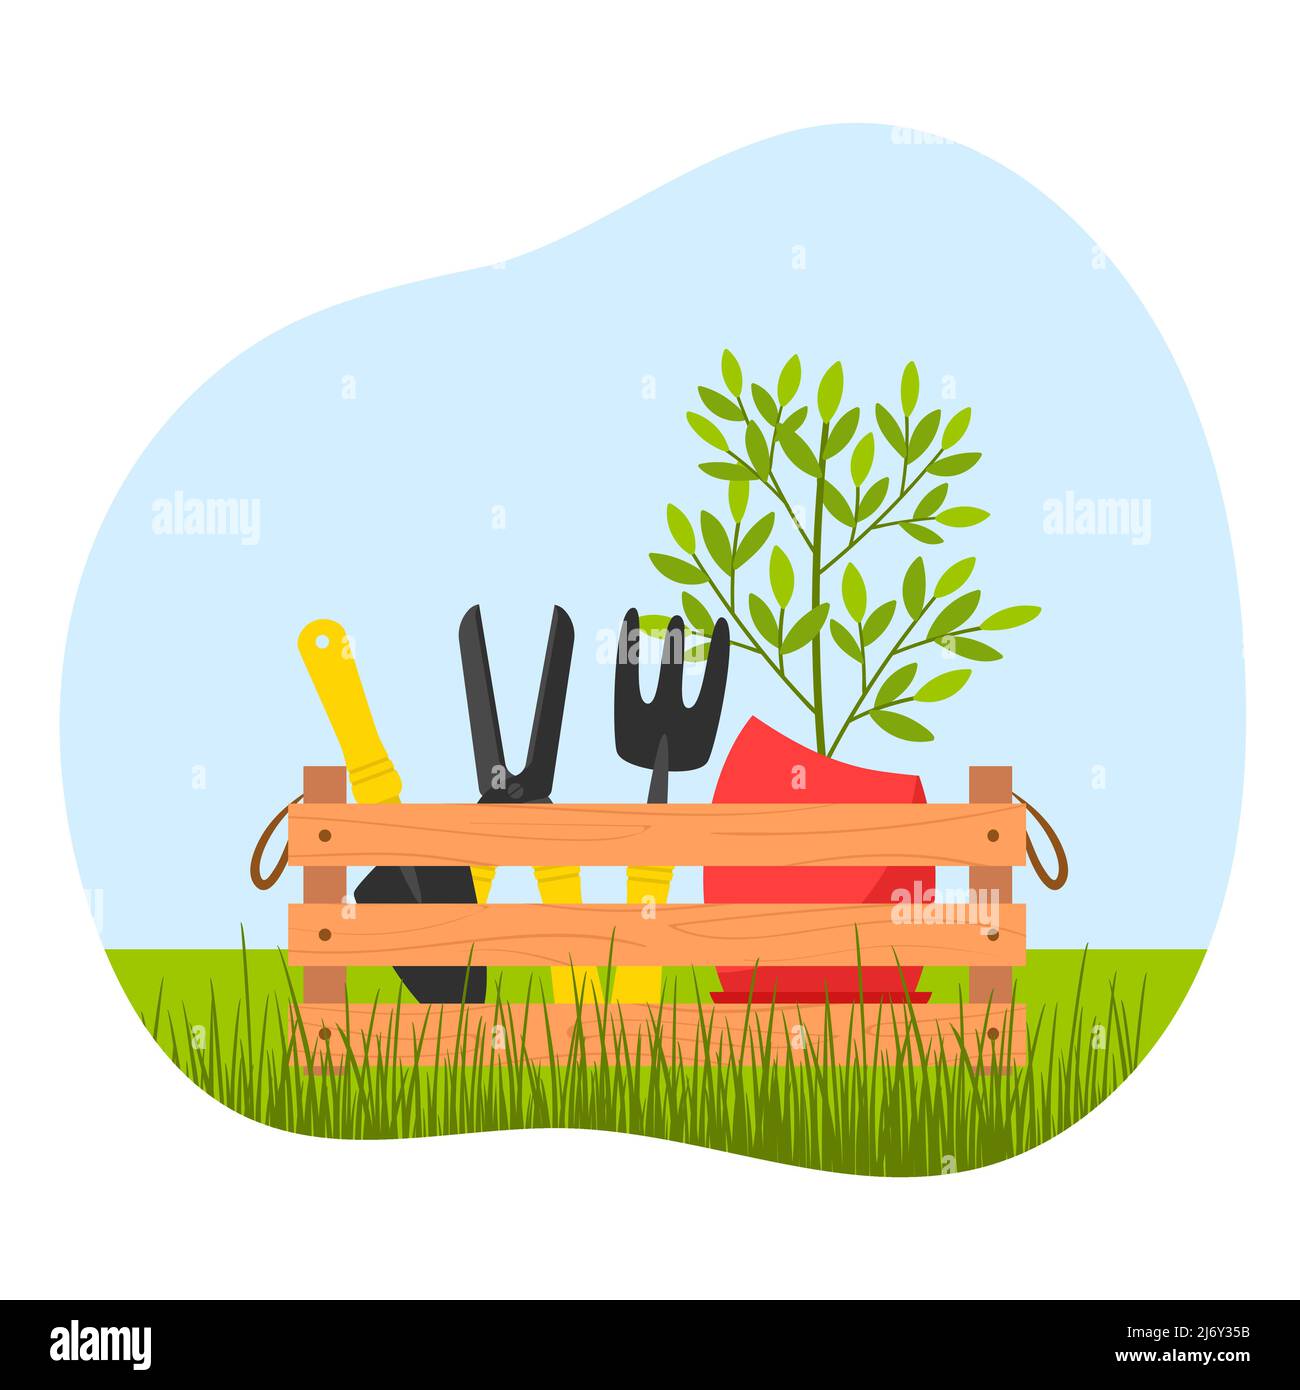 A wooden box with garden tools, pruning shears, a shovel and a ripper, and a planter with a home flower on the background of an abstract shape. Vector Stock Vector